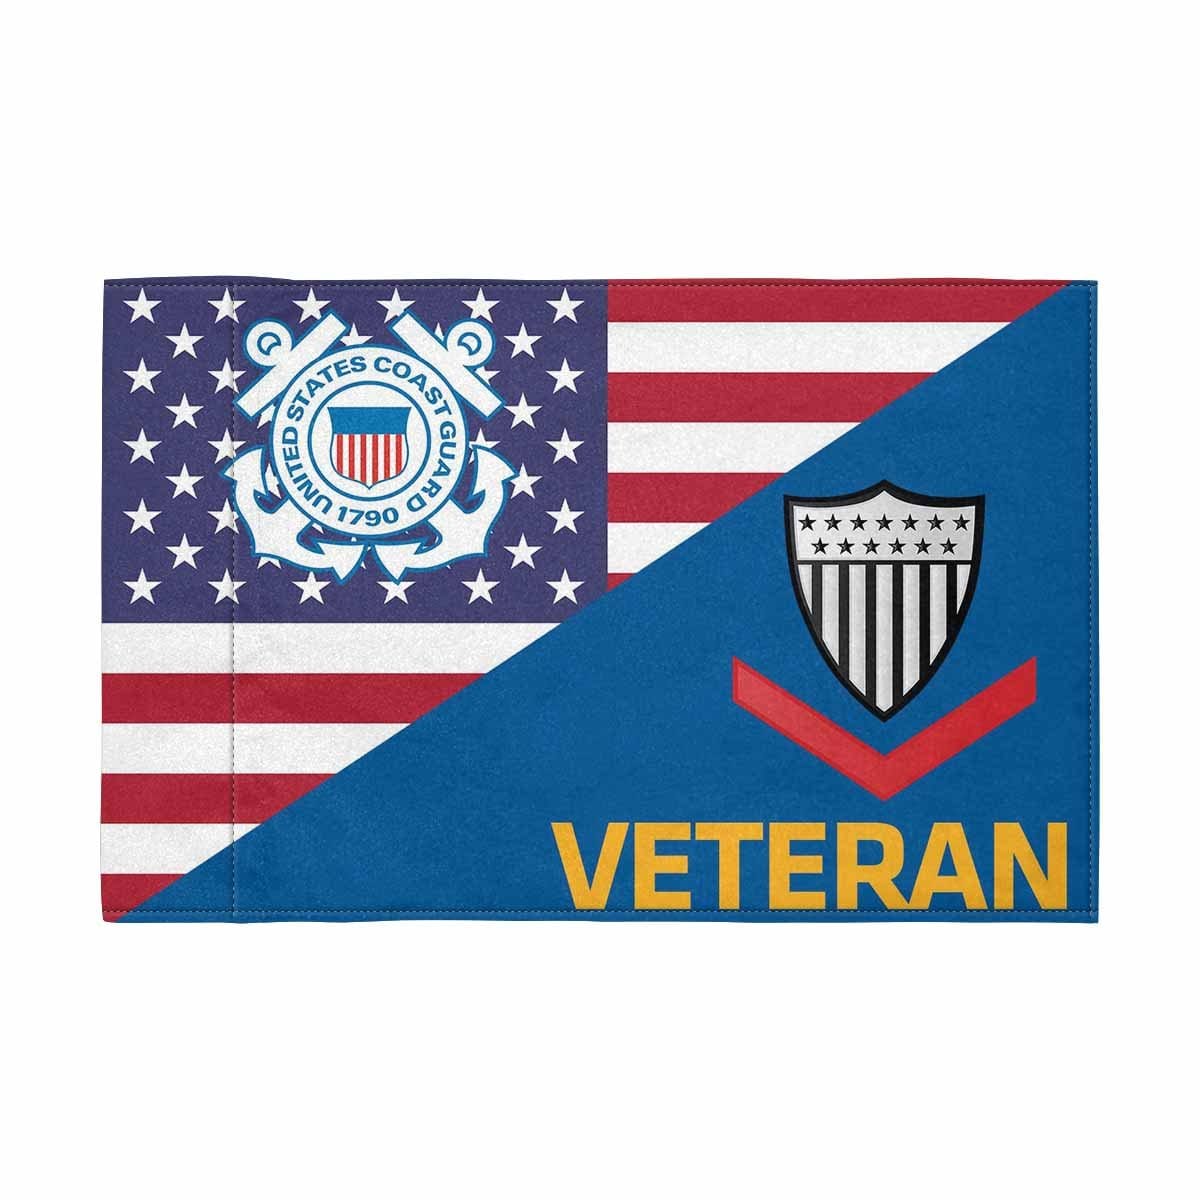 US Coast Guard E-4 Collar Device Veteran Motorcycle Flag 9" x 6" Twin-Side Printing D01-MotorcycleFlag-USCG-Veterans Nation